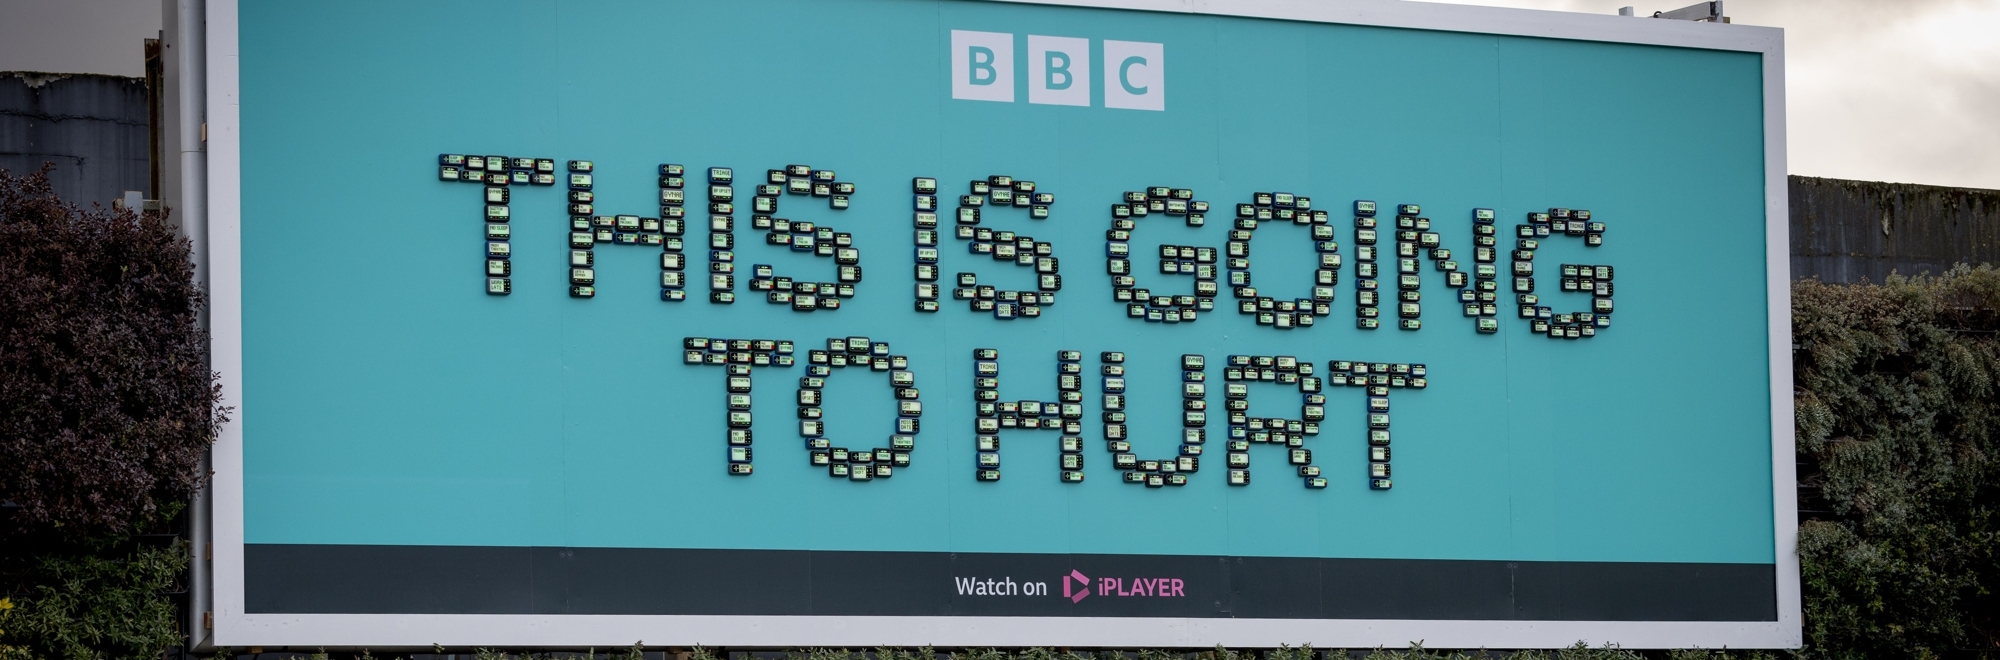 BBC Creative uses a billboard full of working pagers to alert London to its new series